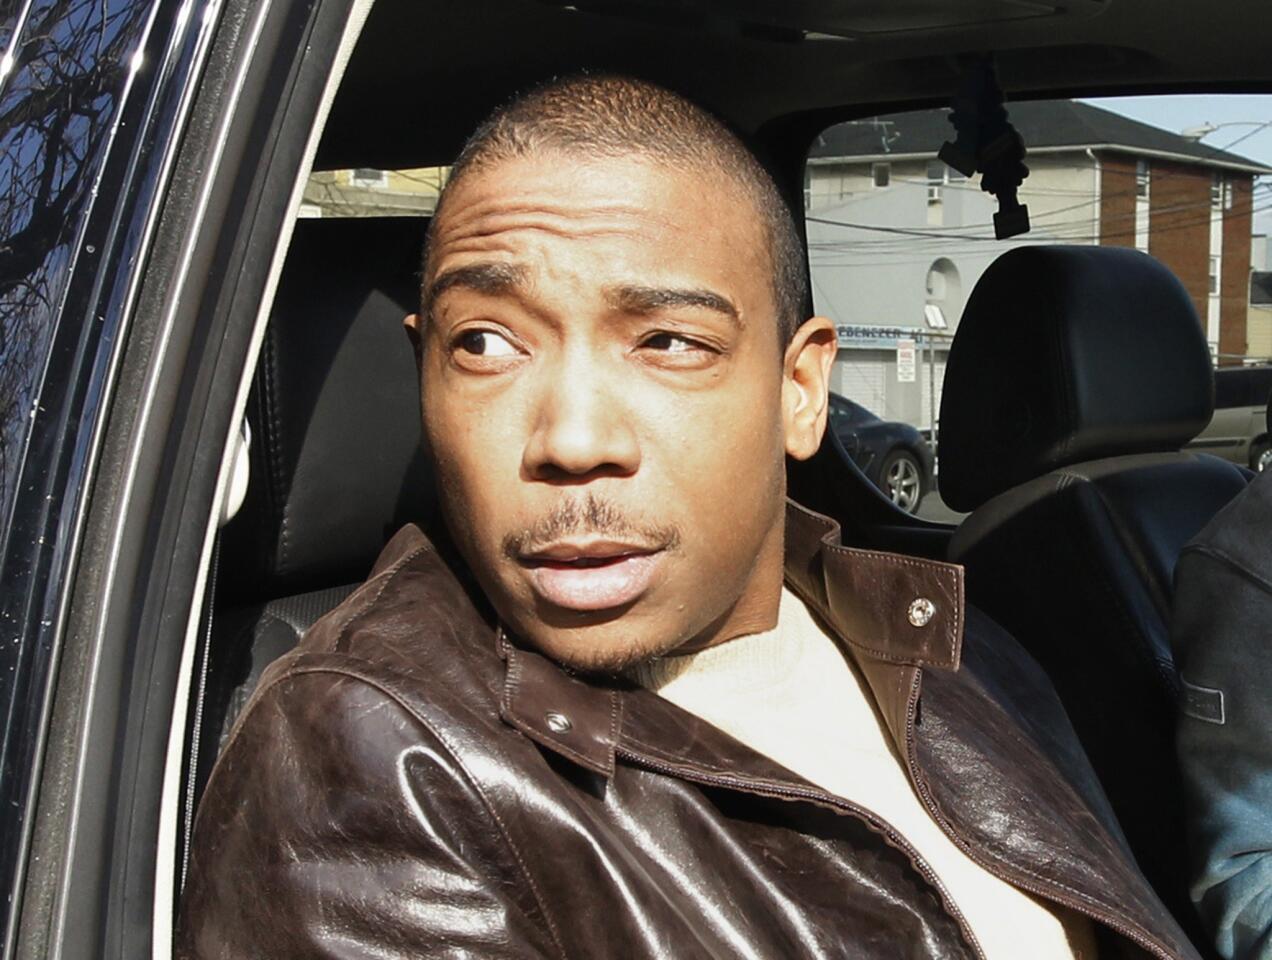 Ja Rule took another step Tuesday toward life as a free man when he was released from a federal prison in upstate New York and headed home to begin home confinement for the balance of his sentence. The rapper, real name Jeffrey Atkins, was picked up around 10 a.m. by his wife, who drove him straight home, a source told TMZ. According to the federal Bureau of Prisons, his release date remains July 28. The 37-year-old will serve out his federal time in federally monitored home confinement, his rep told MTV in a statement. Full story: Ja Rule leaves federal prison for home confinement | PHOTOS: Celebrity mug shots